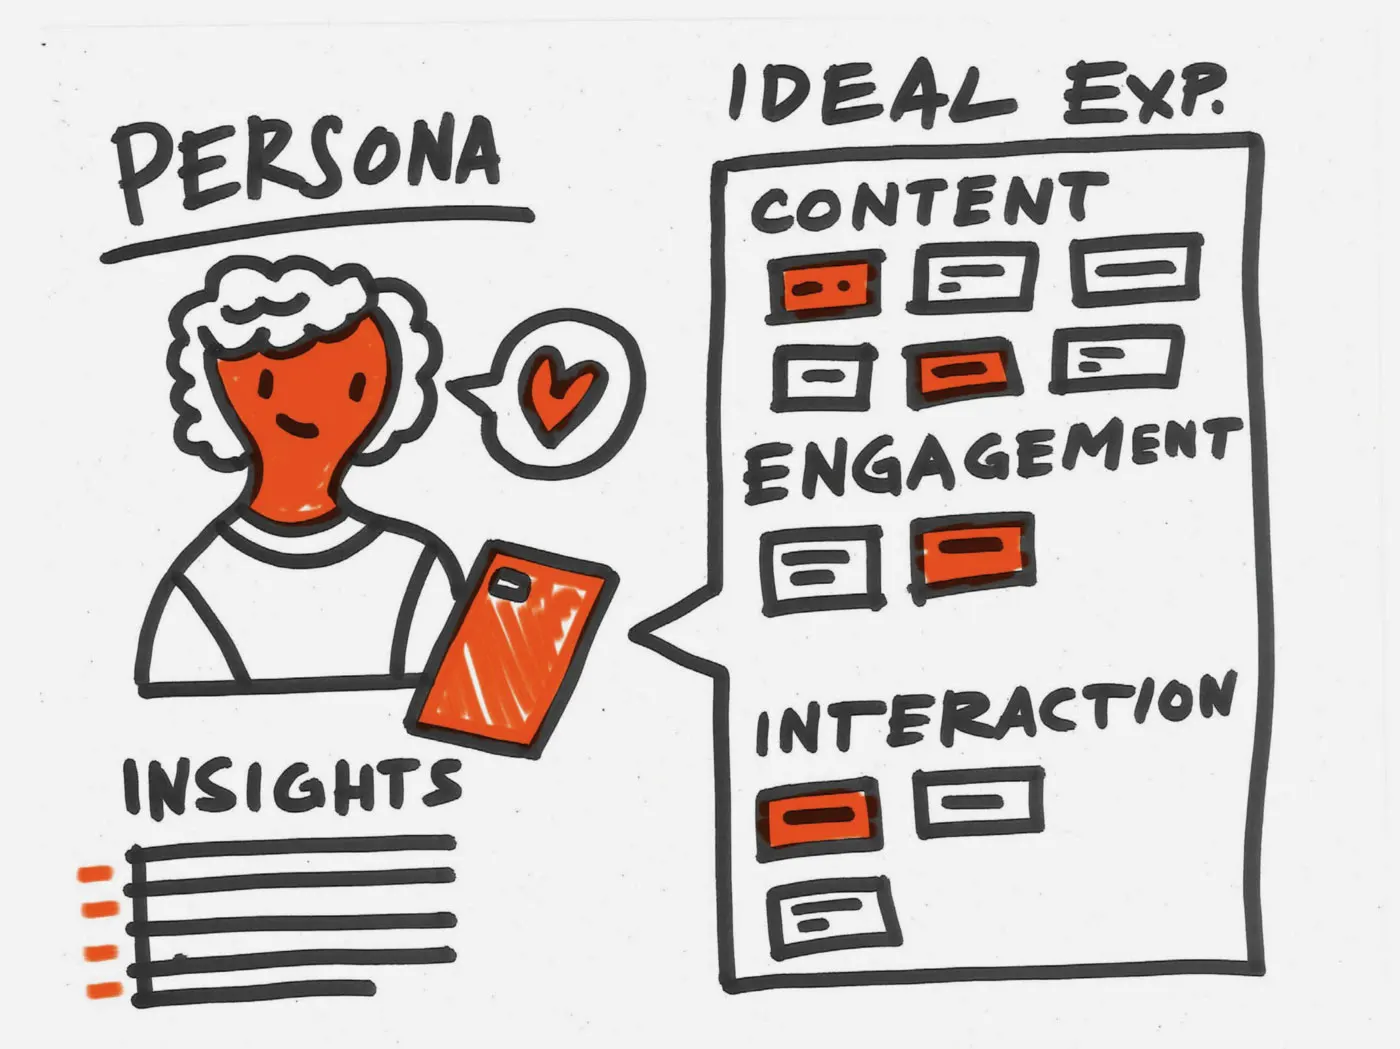 Black marker sketch with the headings "Persona" and "Ideal experience" and underneath them list-making subheads: Insights. Content. Engagement. Interaction. 